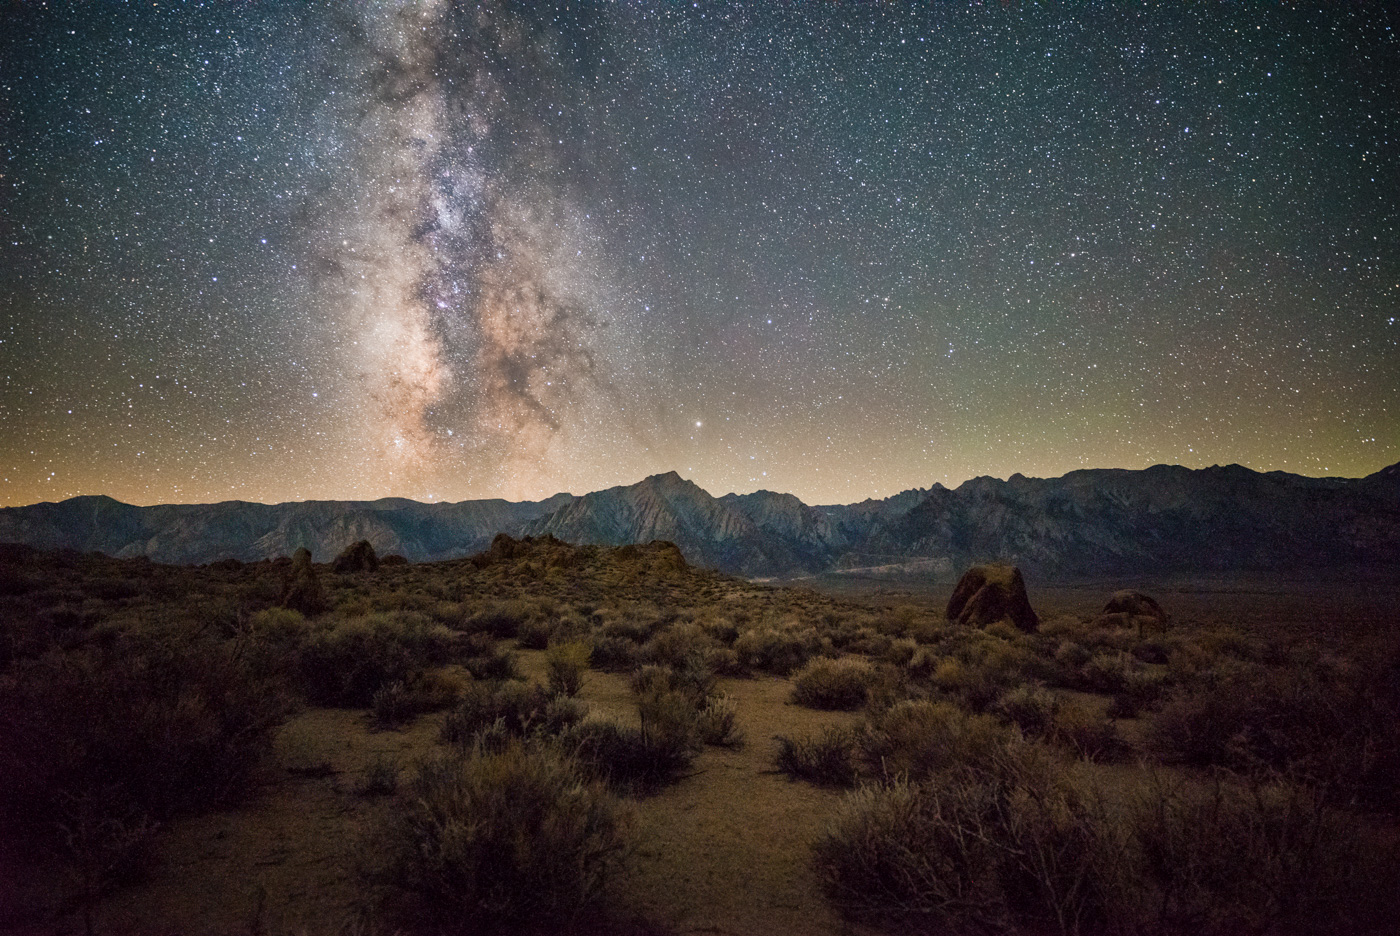 Eastern Sierras from Alabama Hills. Sony a7S. Zeiss Batis 18mm f/2.8, 15s, f/2.8, ISO 12800